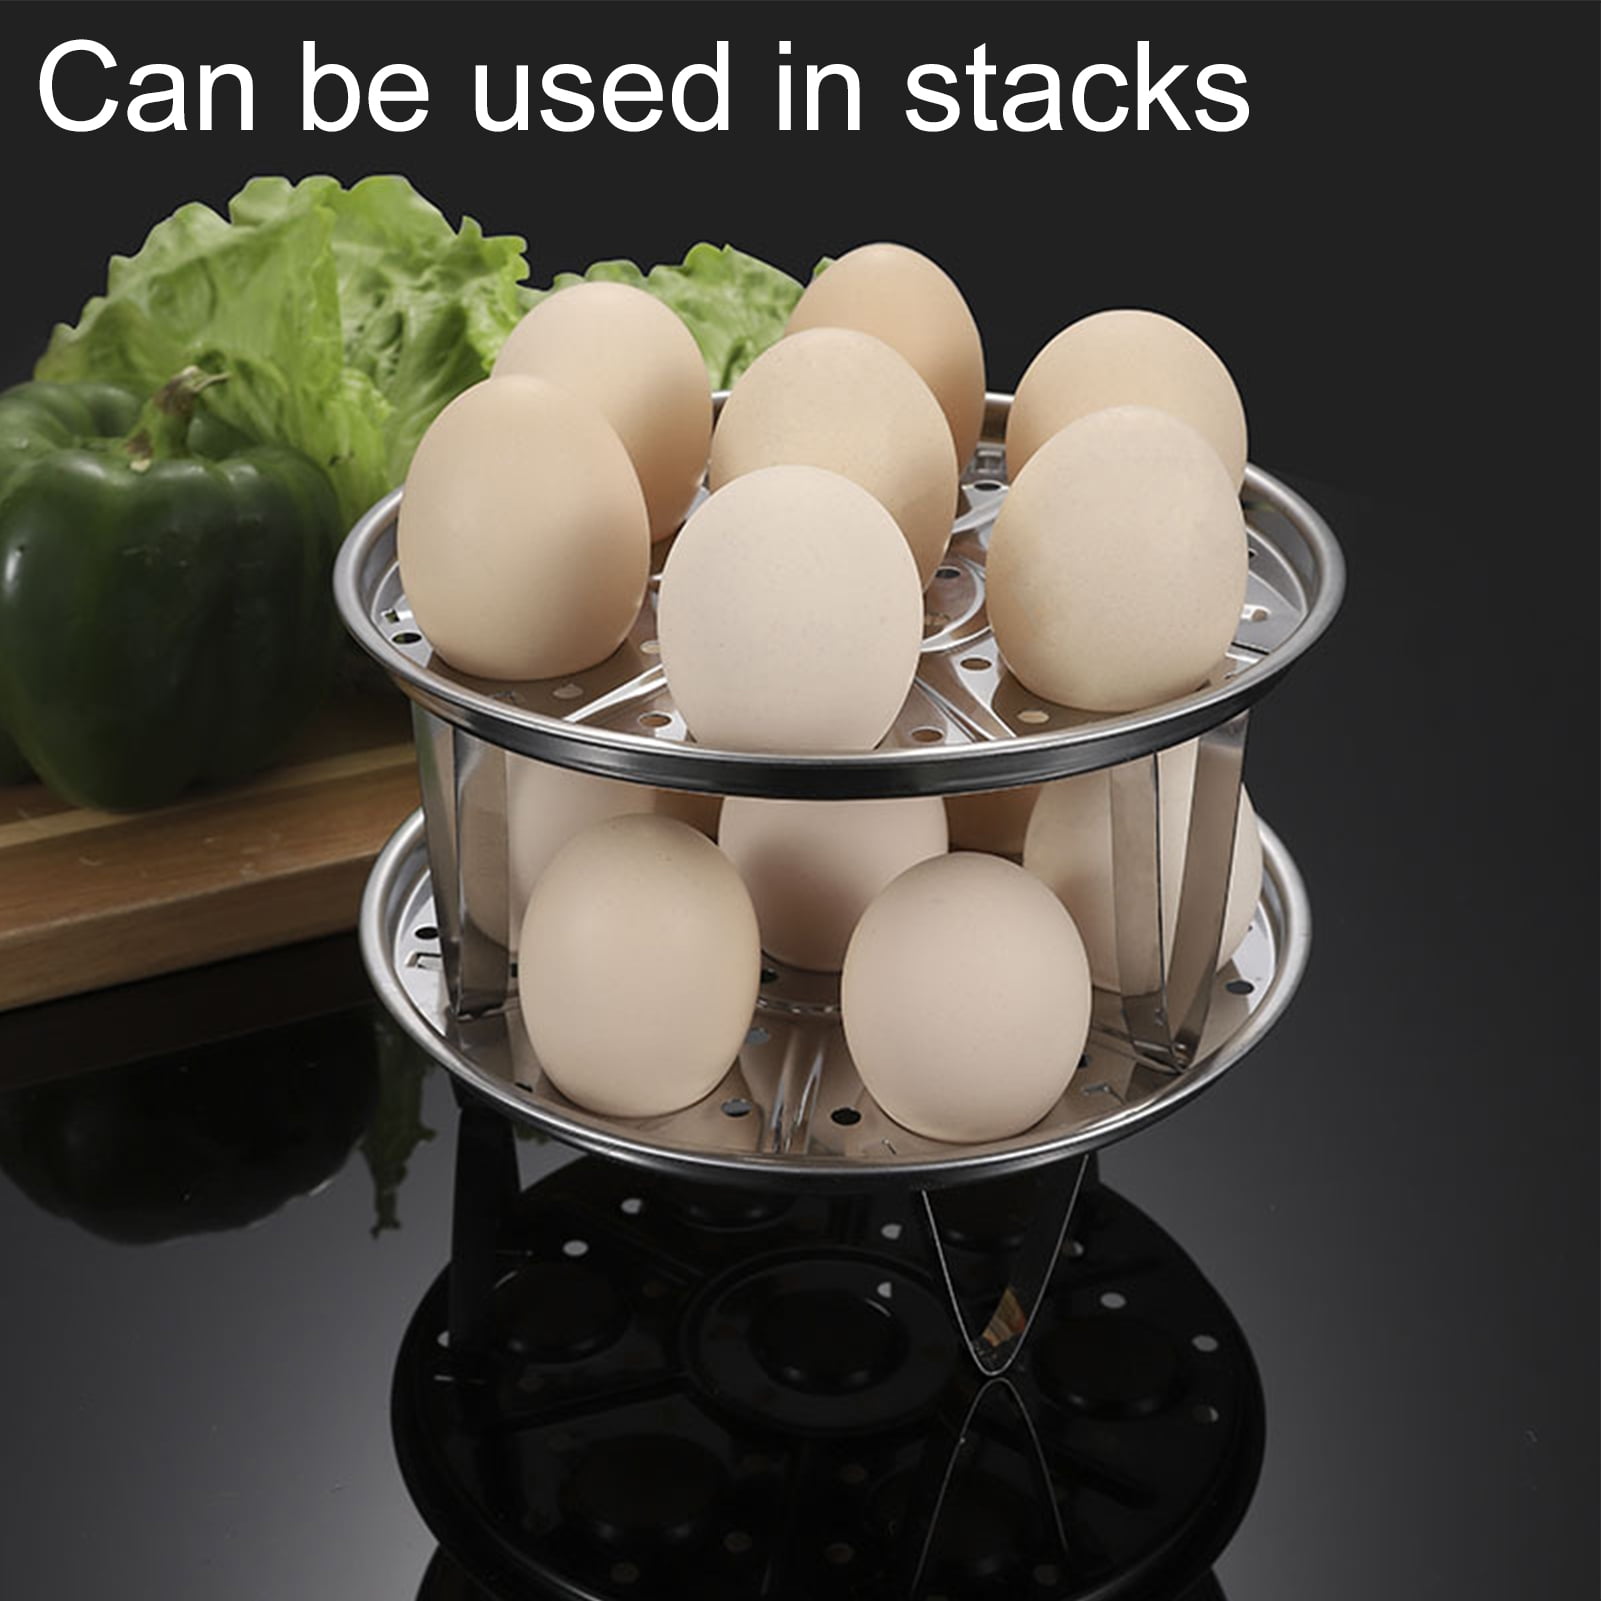 Conditiclusy Stackable Steamed Egg Rack Heat Resistant 430 Stainless Steel 7 Holes Instant Pot Egg Steamer Trivet Cooking Utensils, Size: 17.8, High